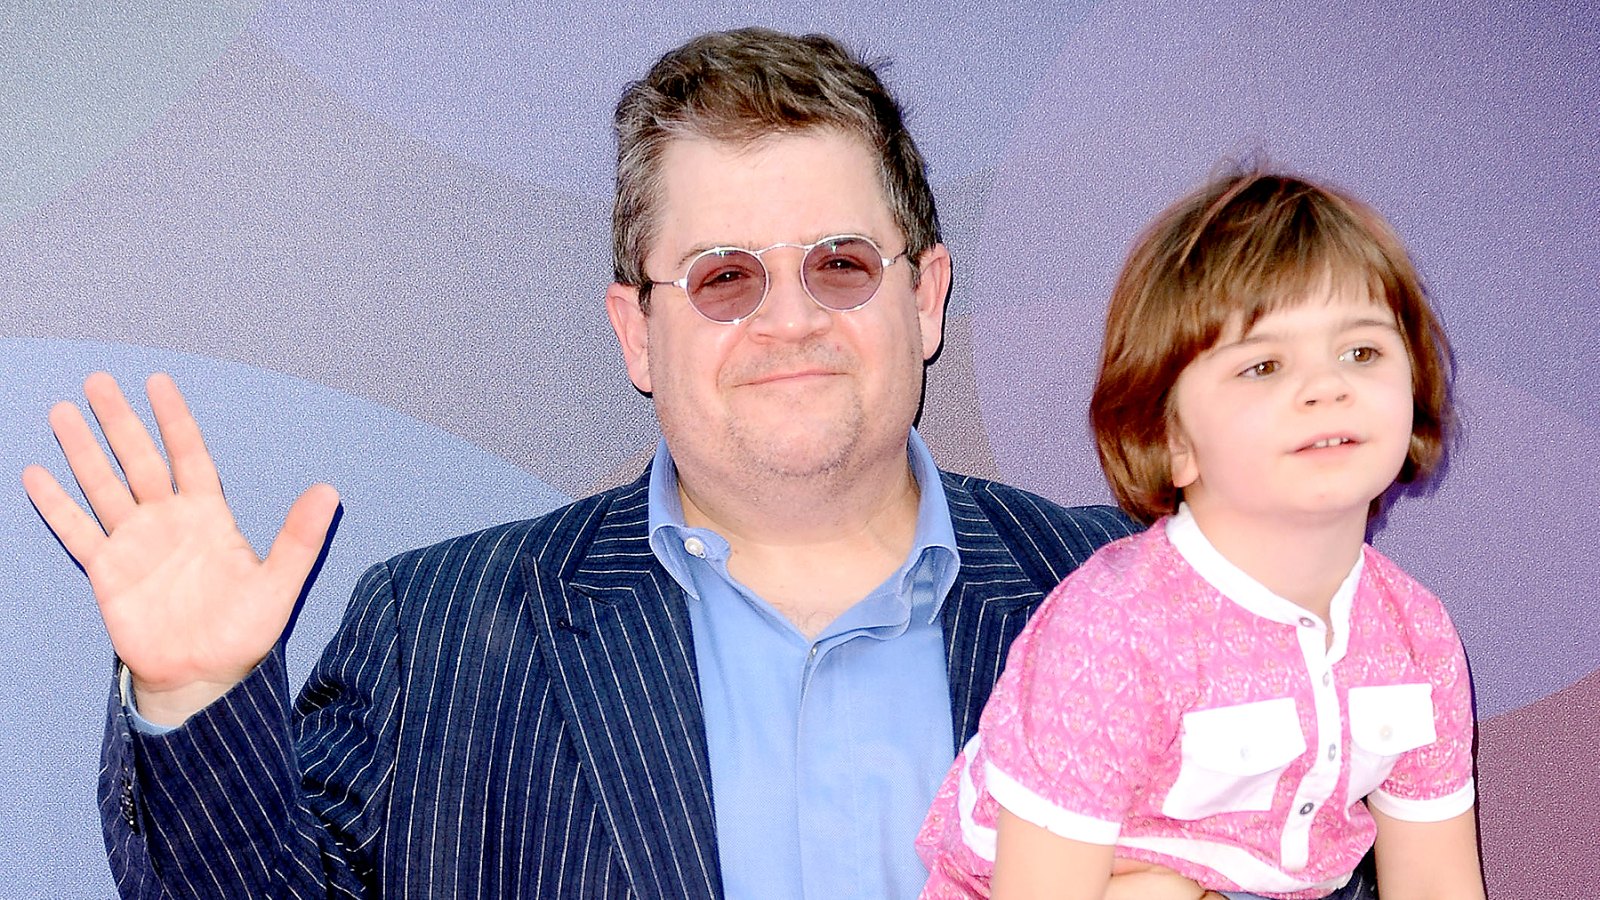 Patton Oswalt and daughter Alice Oswalt attend the premiere of "Inside Out" at the El Capitan Theatre on June 8, 2015 in Hollywood, California.